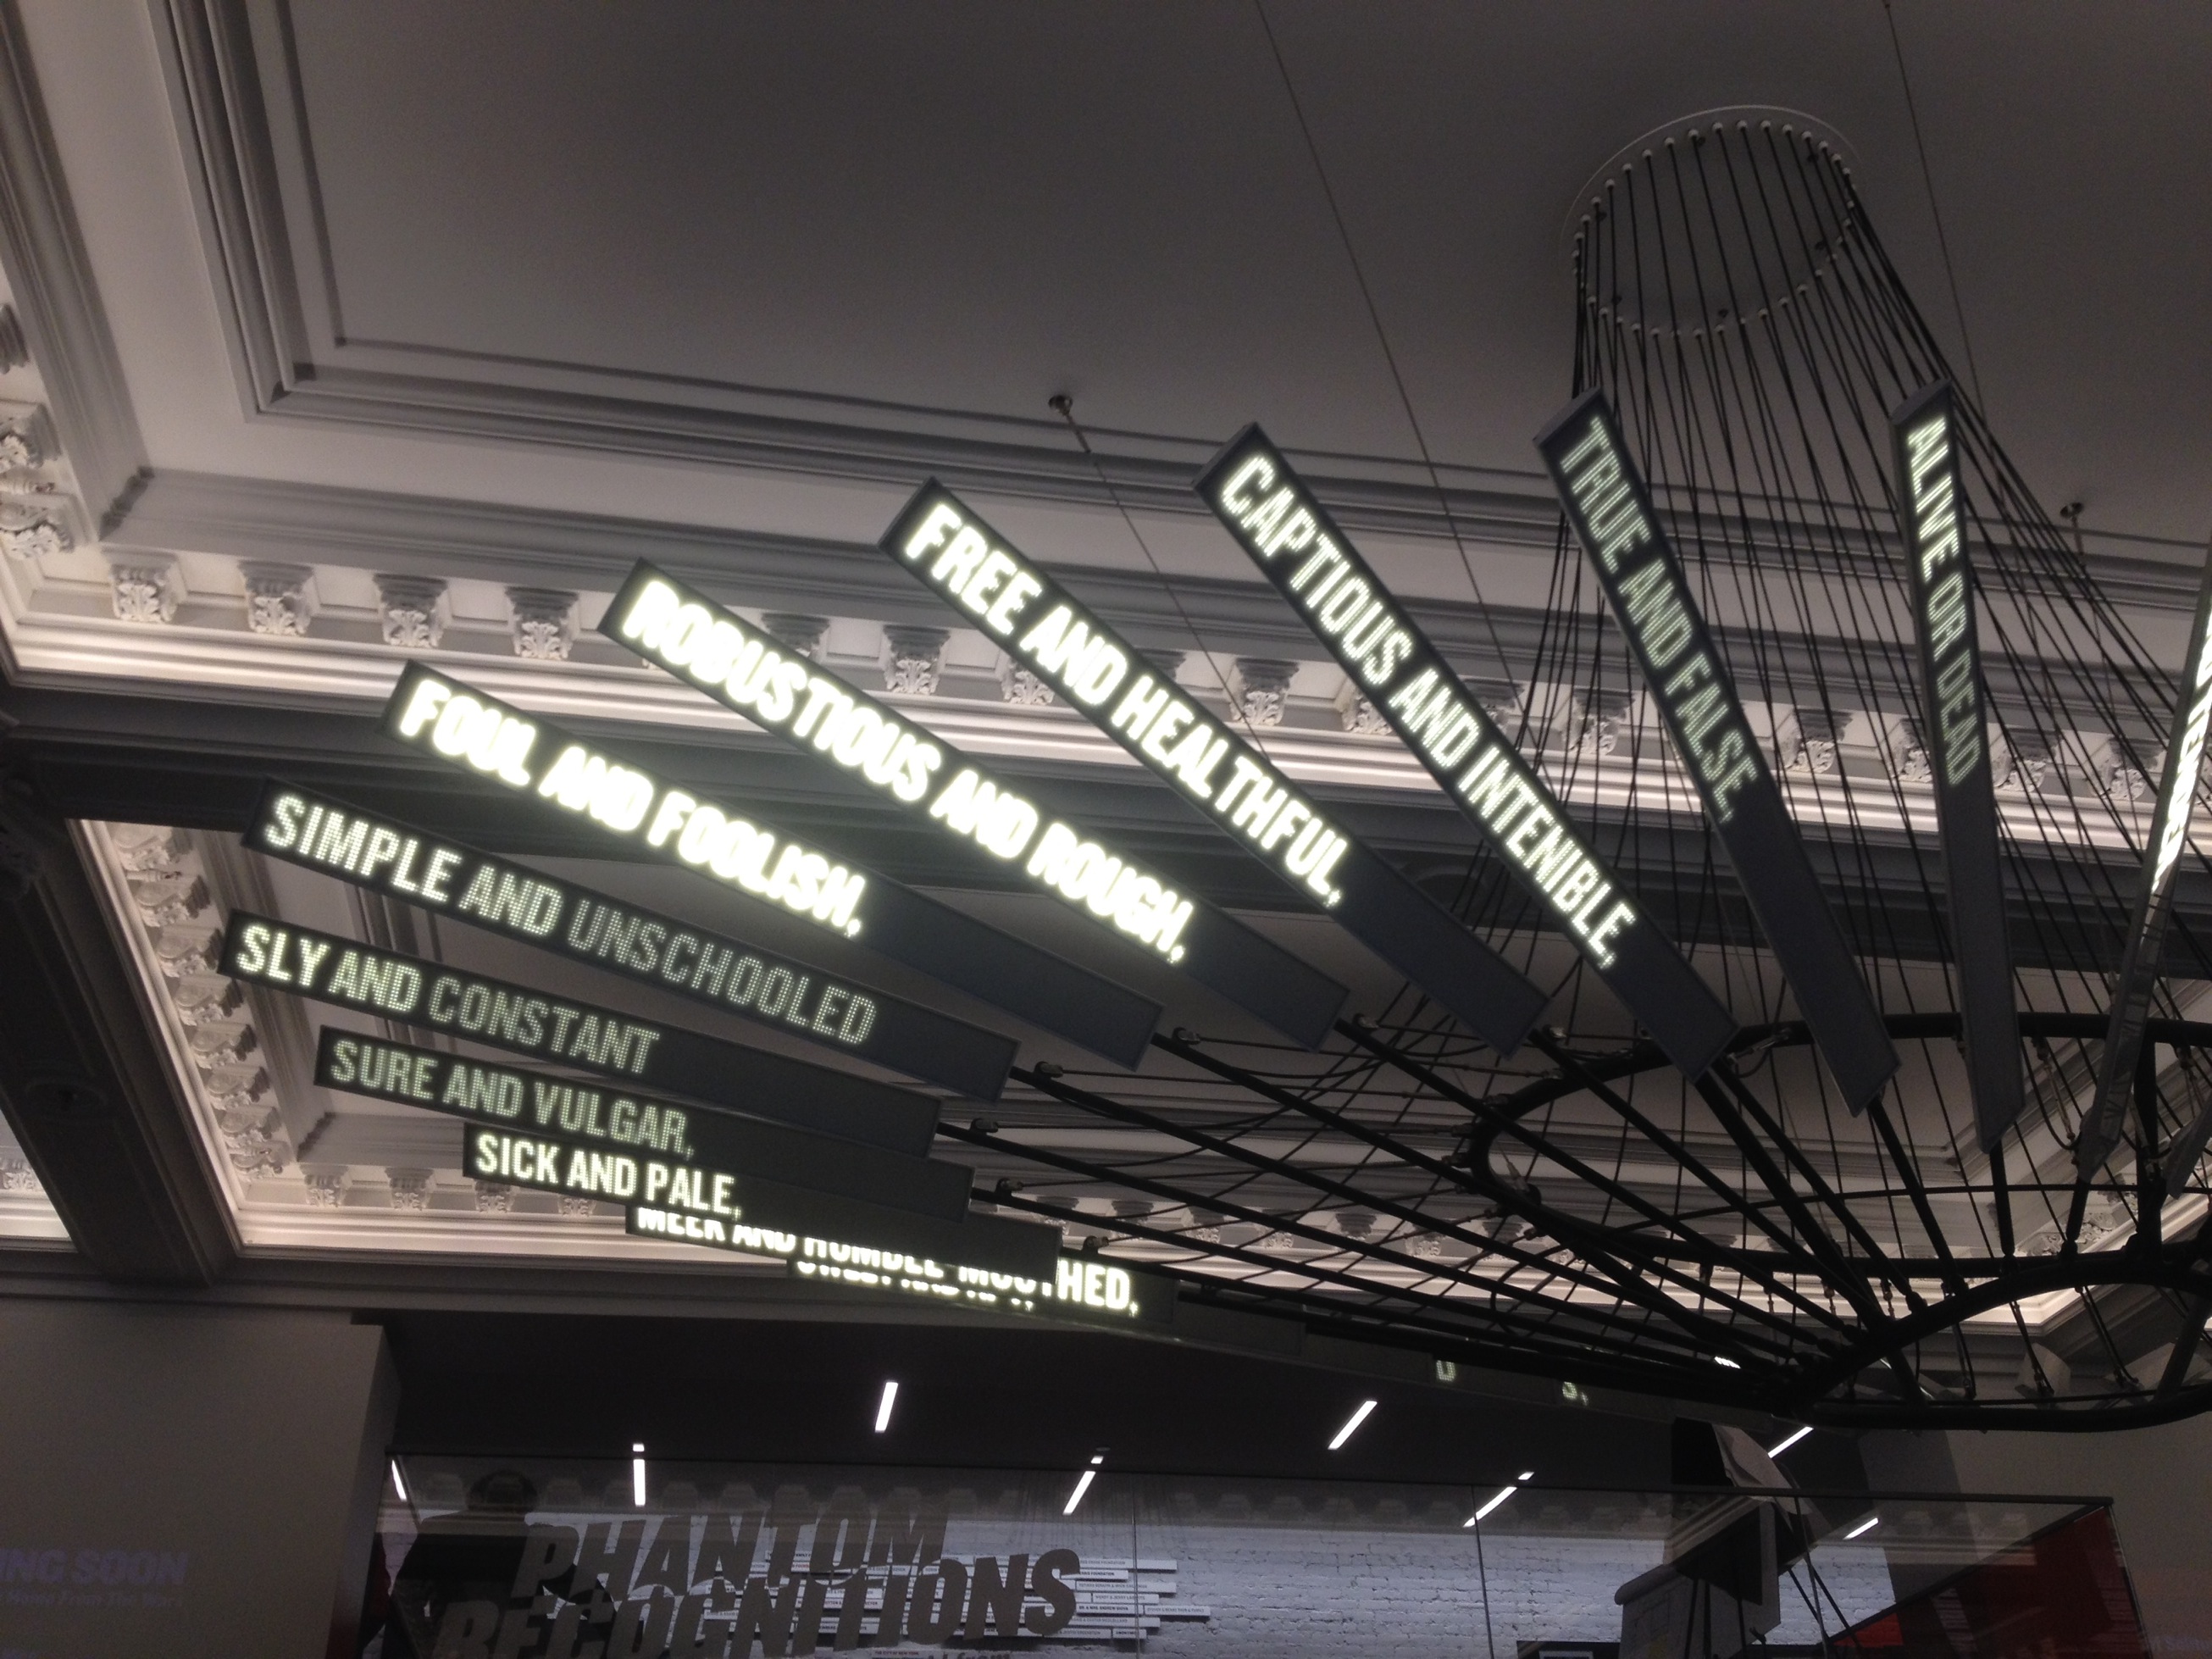 The sculptures generates automatically association of words extracted from Shakespeare's plays.